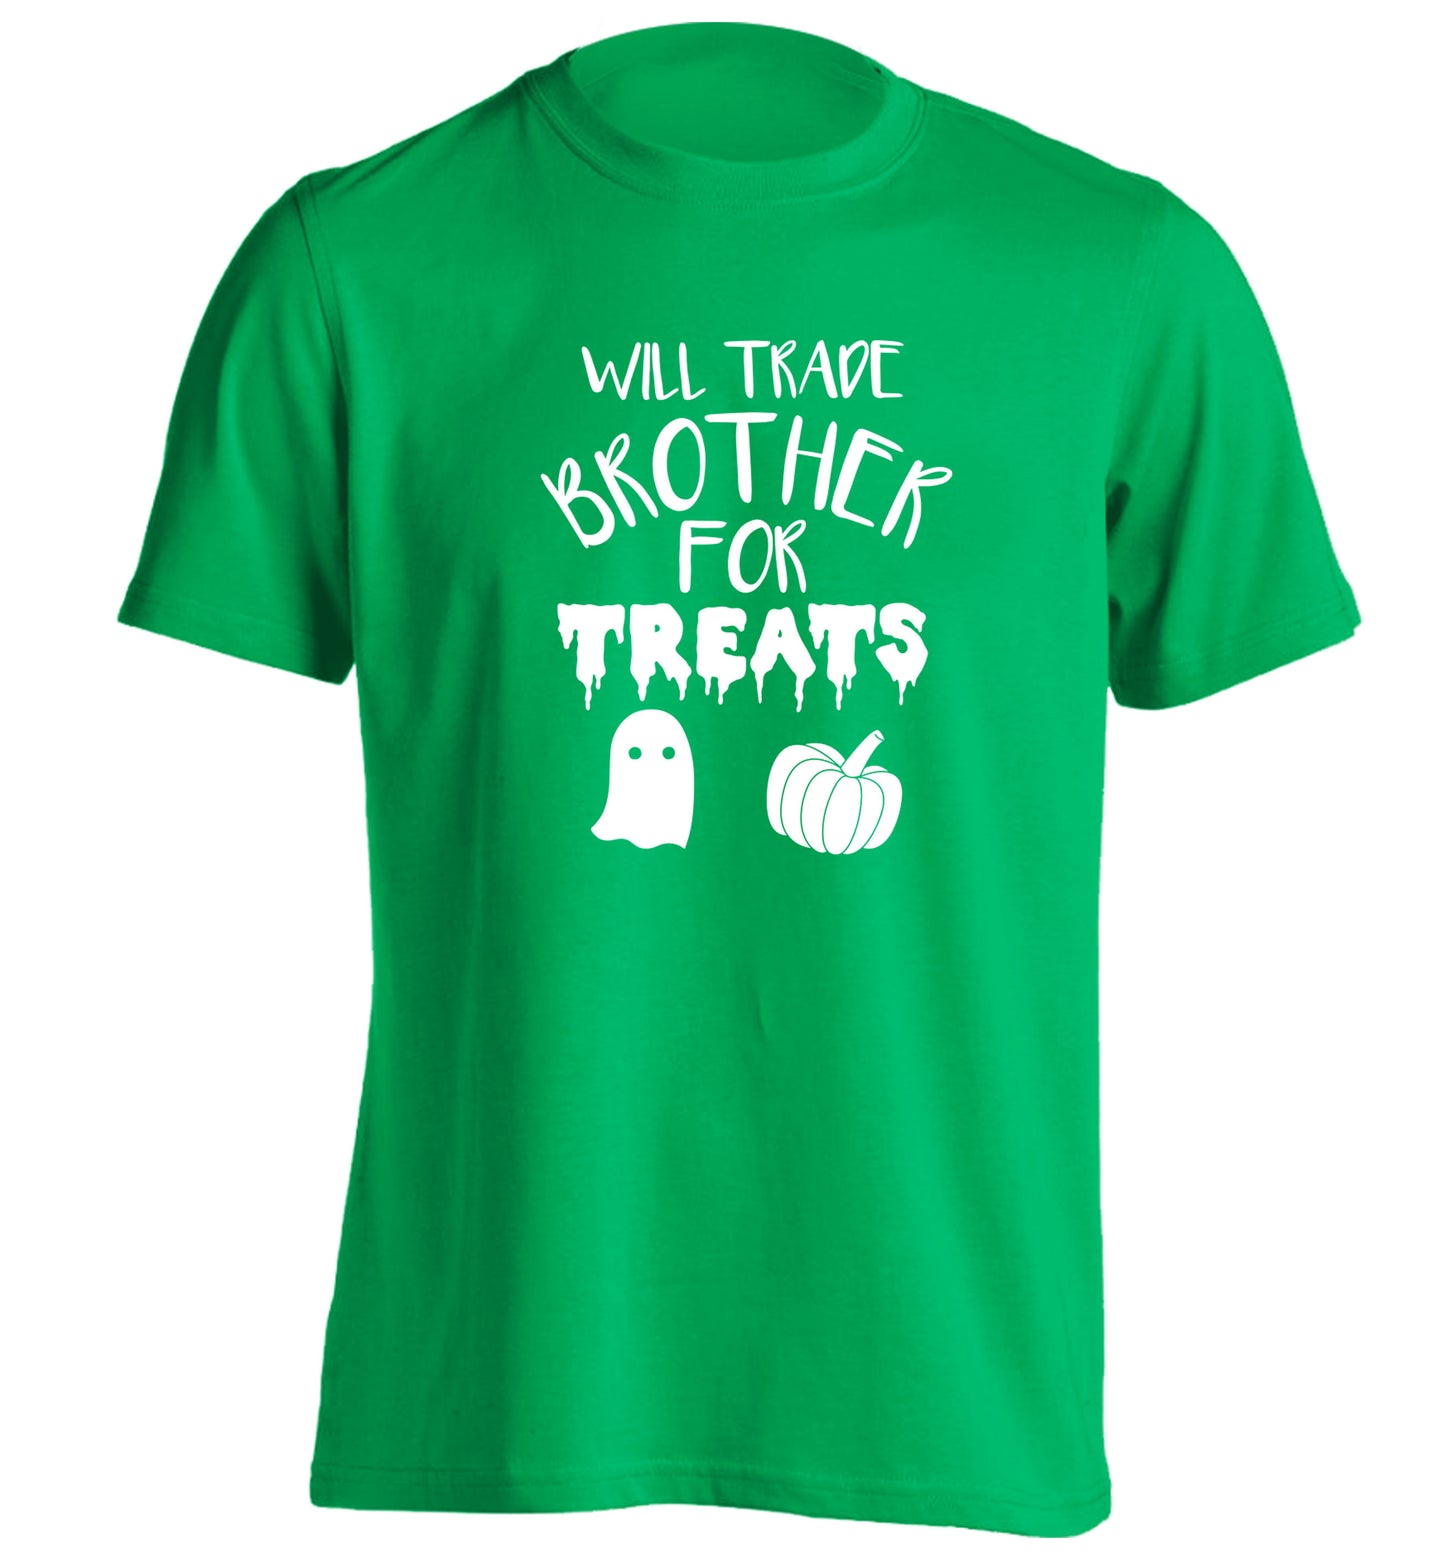 Will trade brother for treats adults unisex green Tshirt 2XL